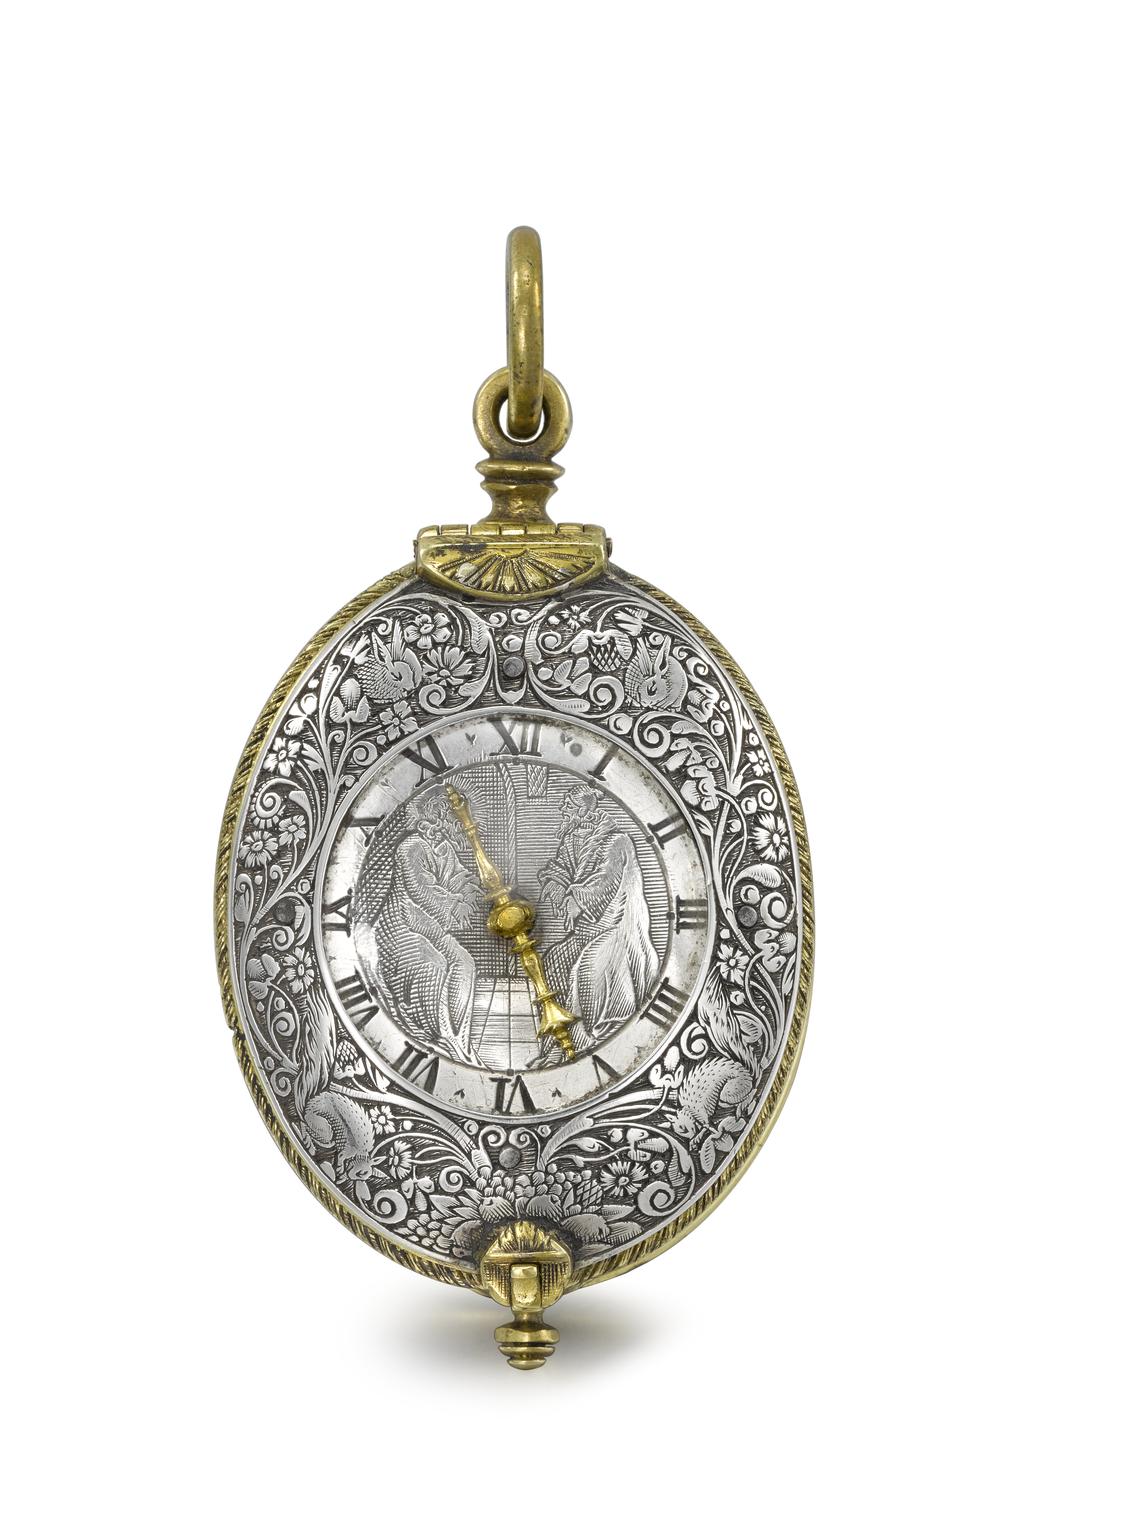 Gilt-metal and engraved silver verge watch by James Valtrolier (watch; verge movement)